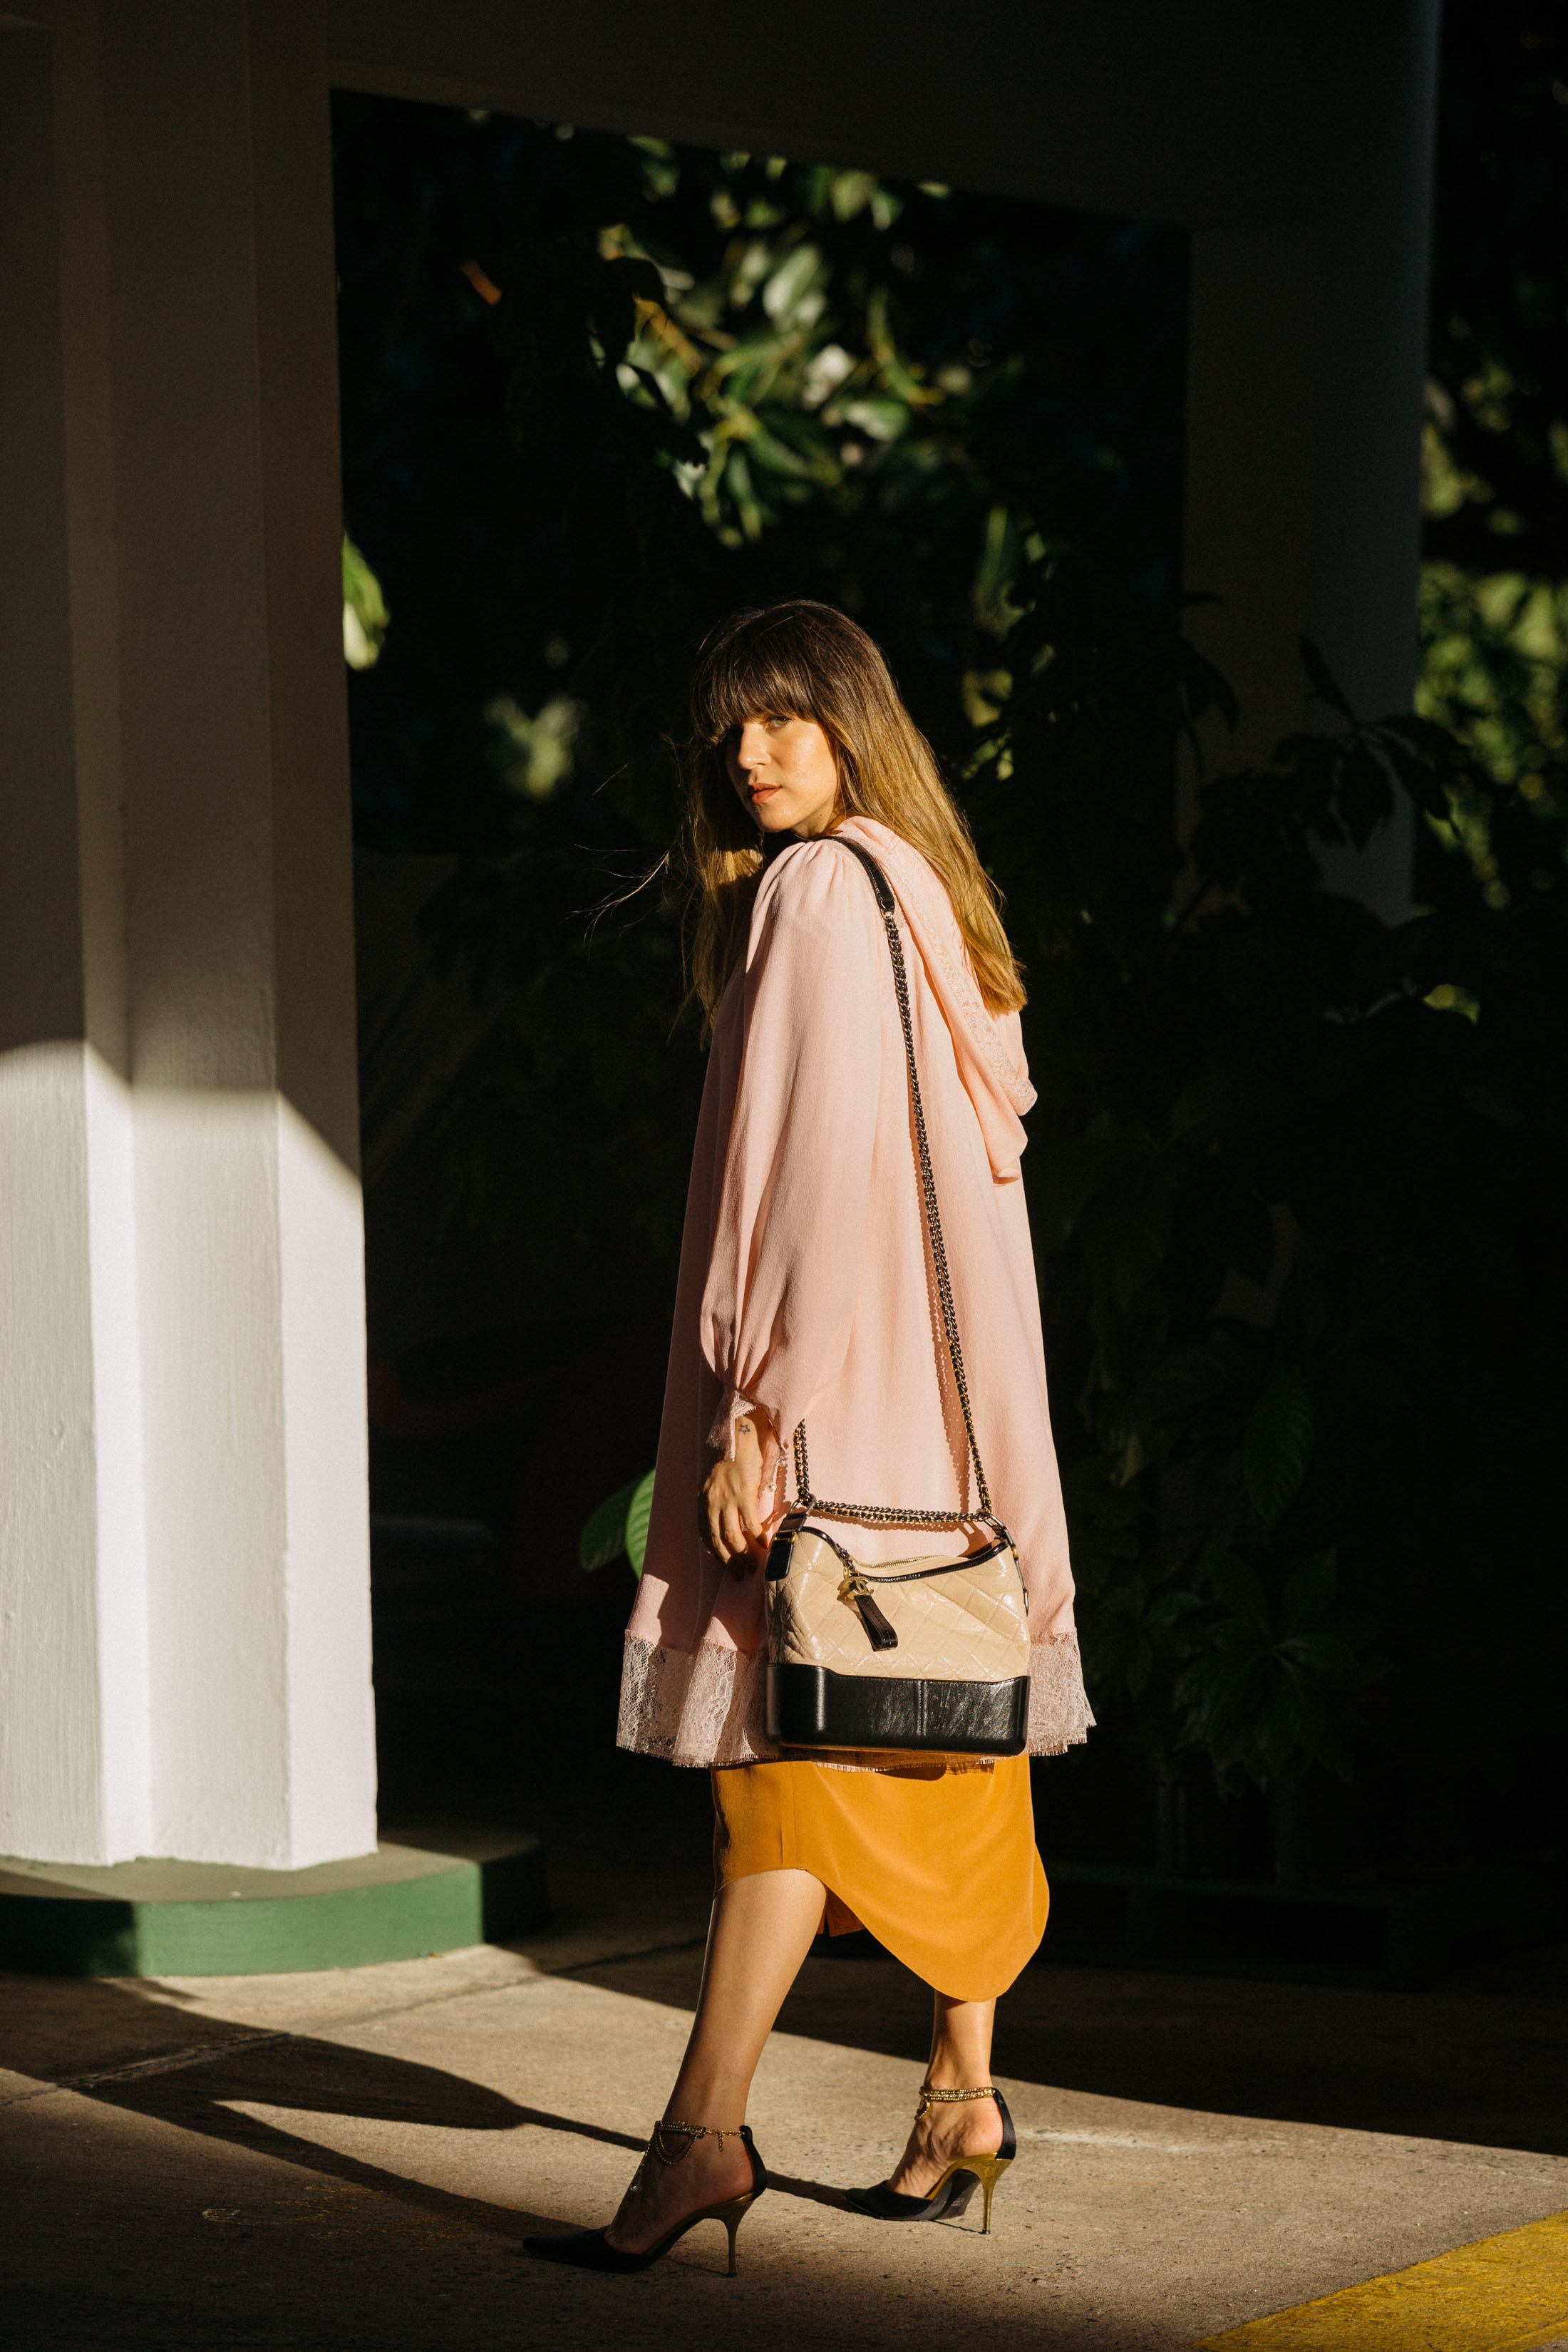 Maristella wears a pink hooded robe and bag from Chanel